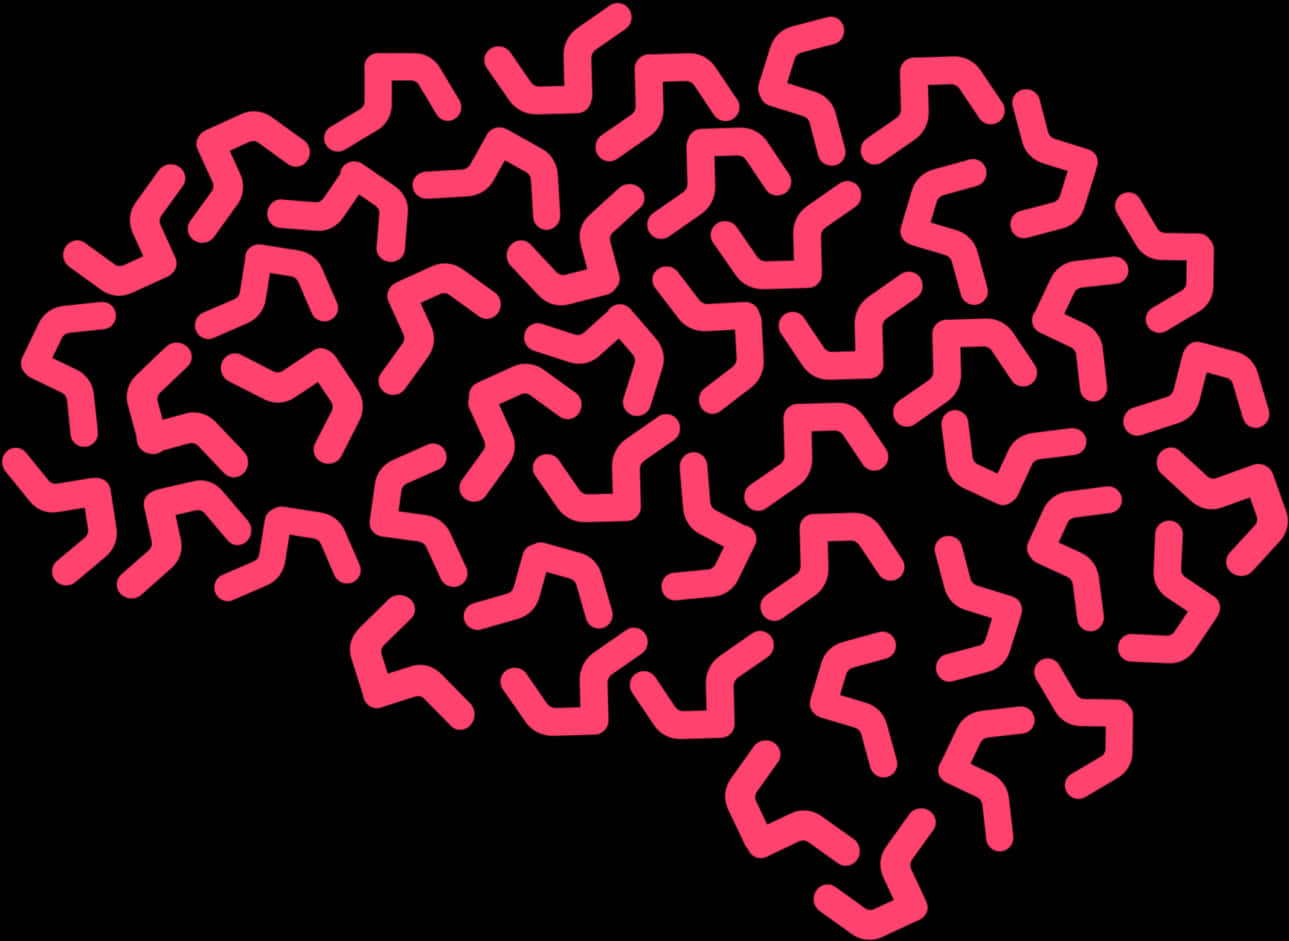 Abstract Neural Network Illustration PNG image